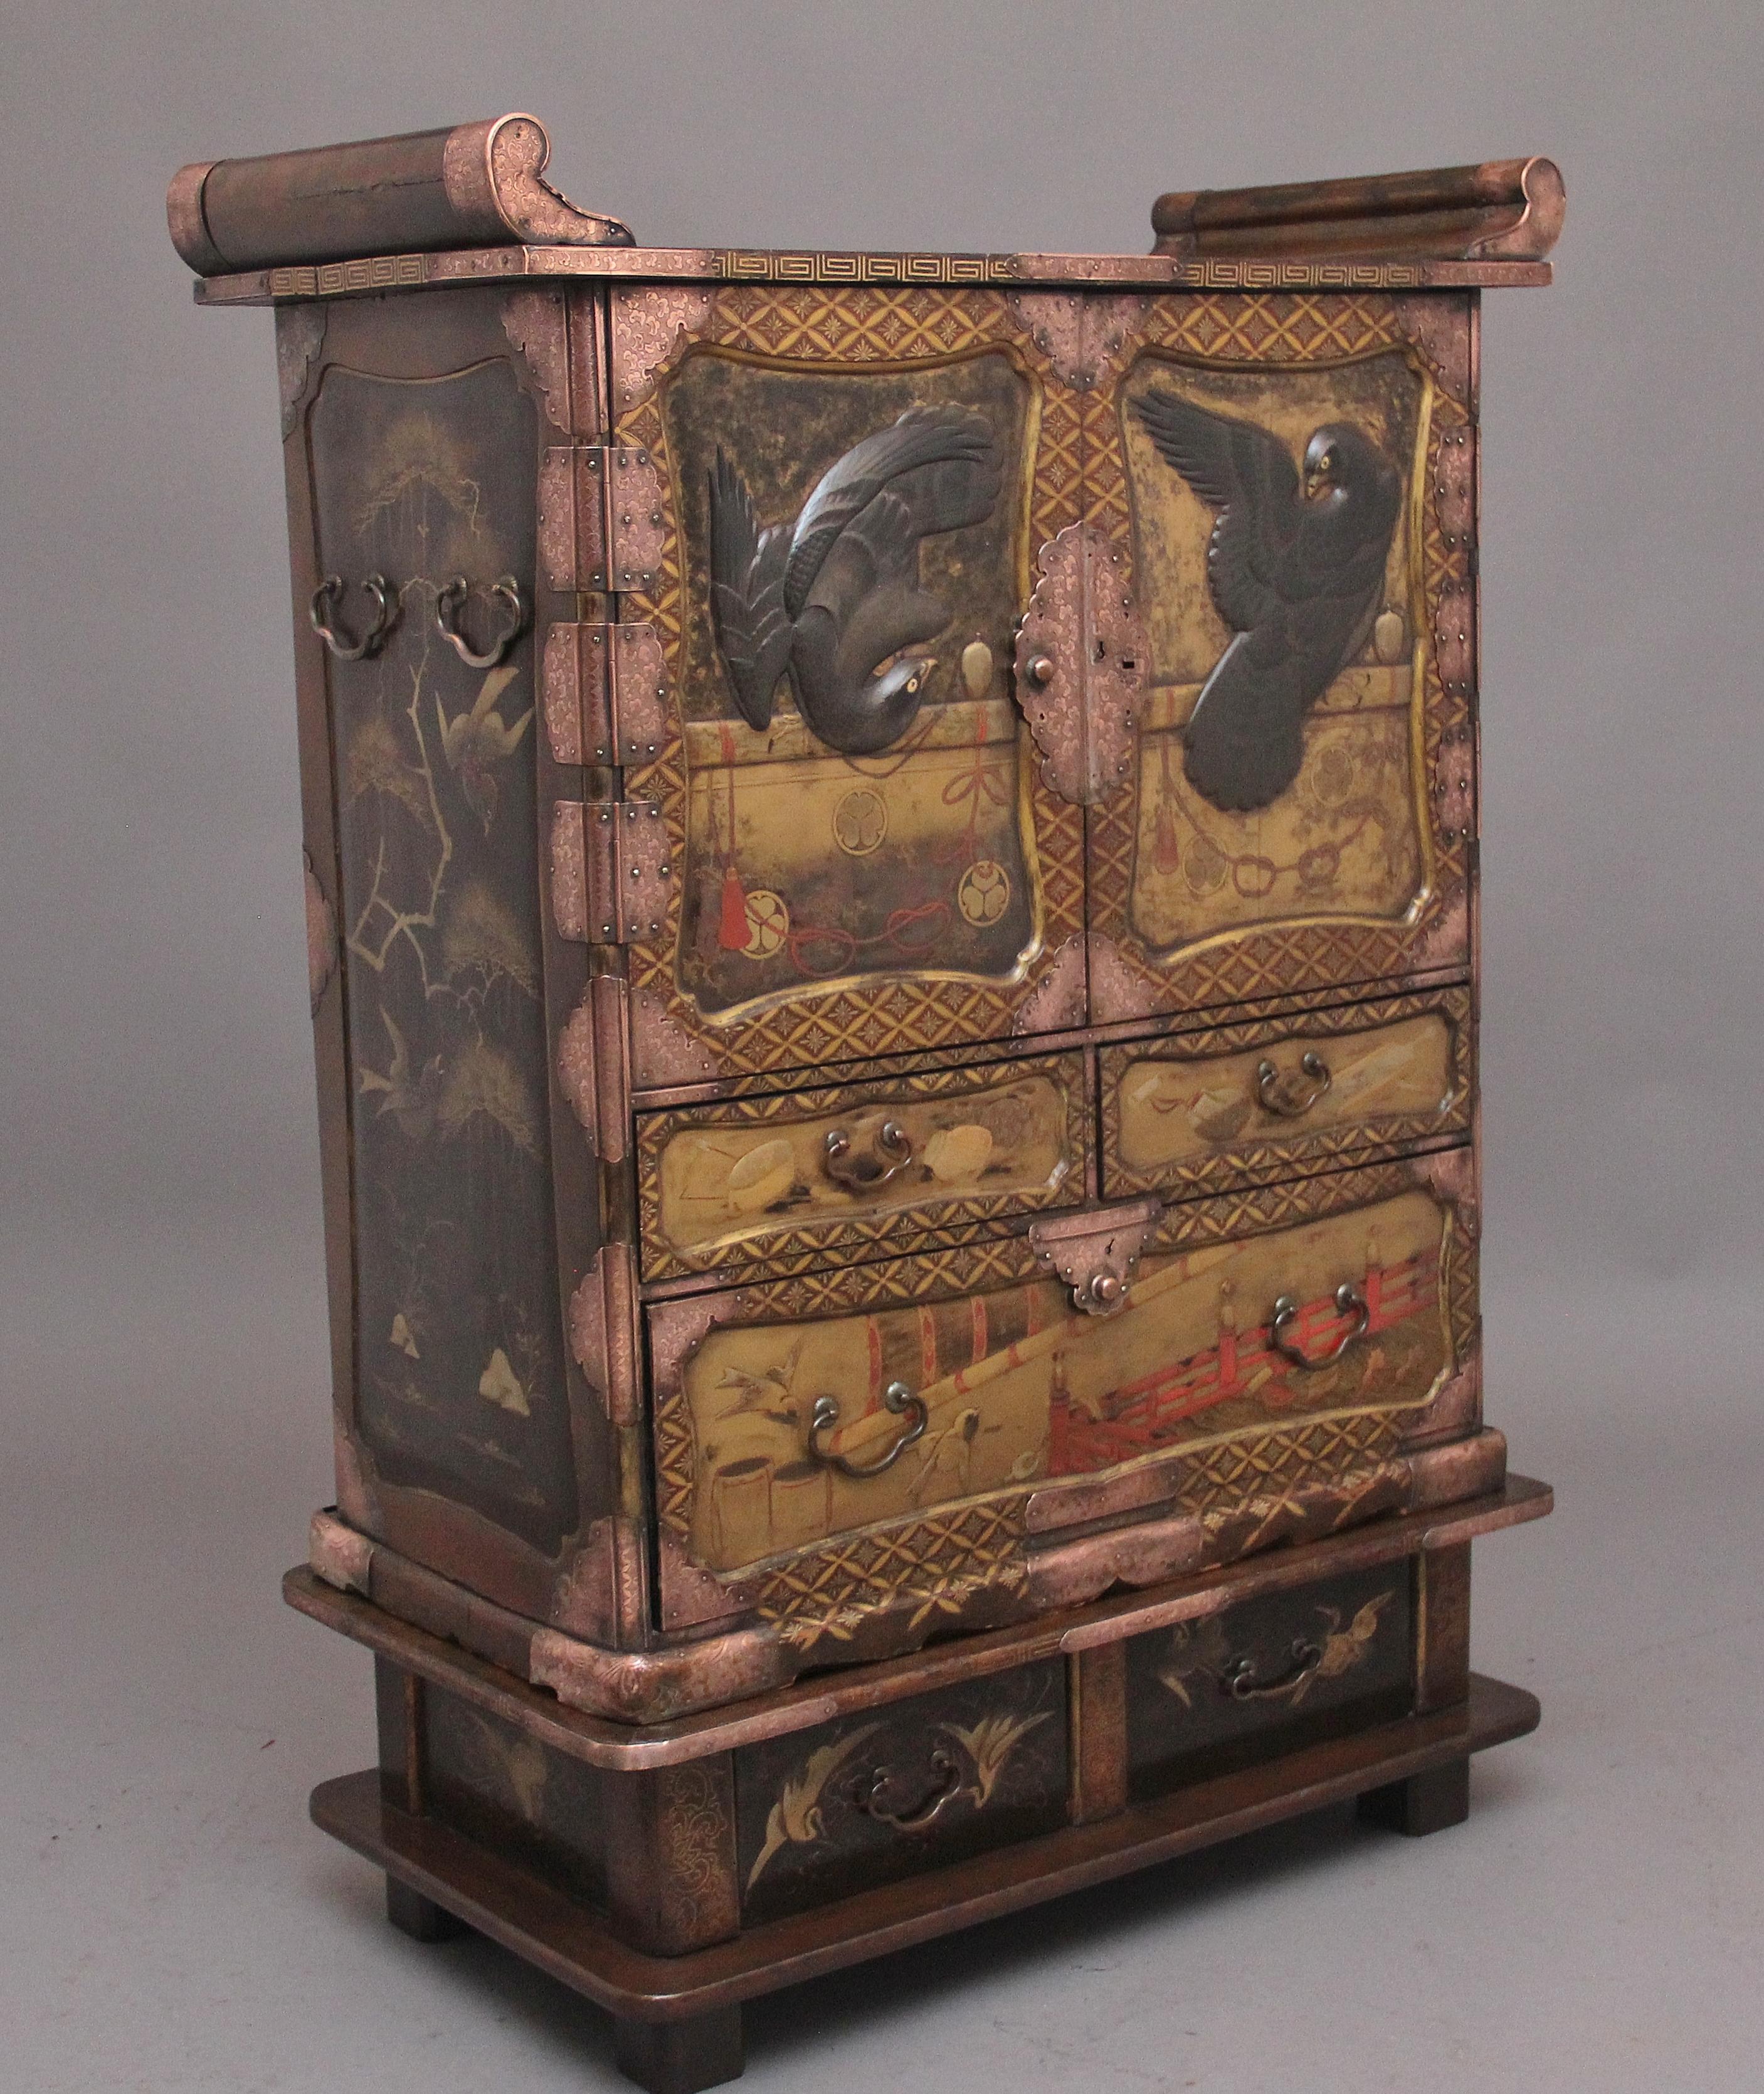 A highly decorative 19th Century Japanese gilt lacquered cabinet from the Meiji period (1868-1912) the double hinged doors decorated with two eagles in relief, each standing on a pole in a shaped panel, opening to reveal two shelves and five